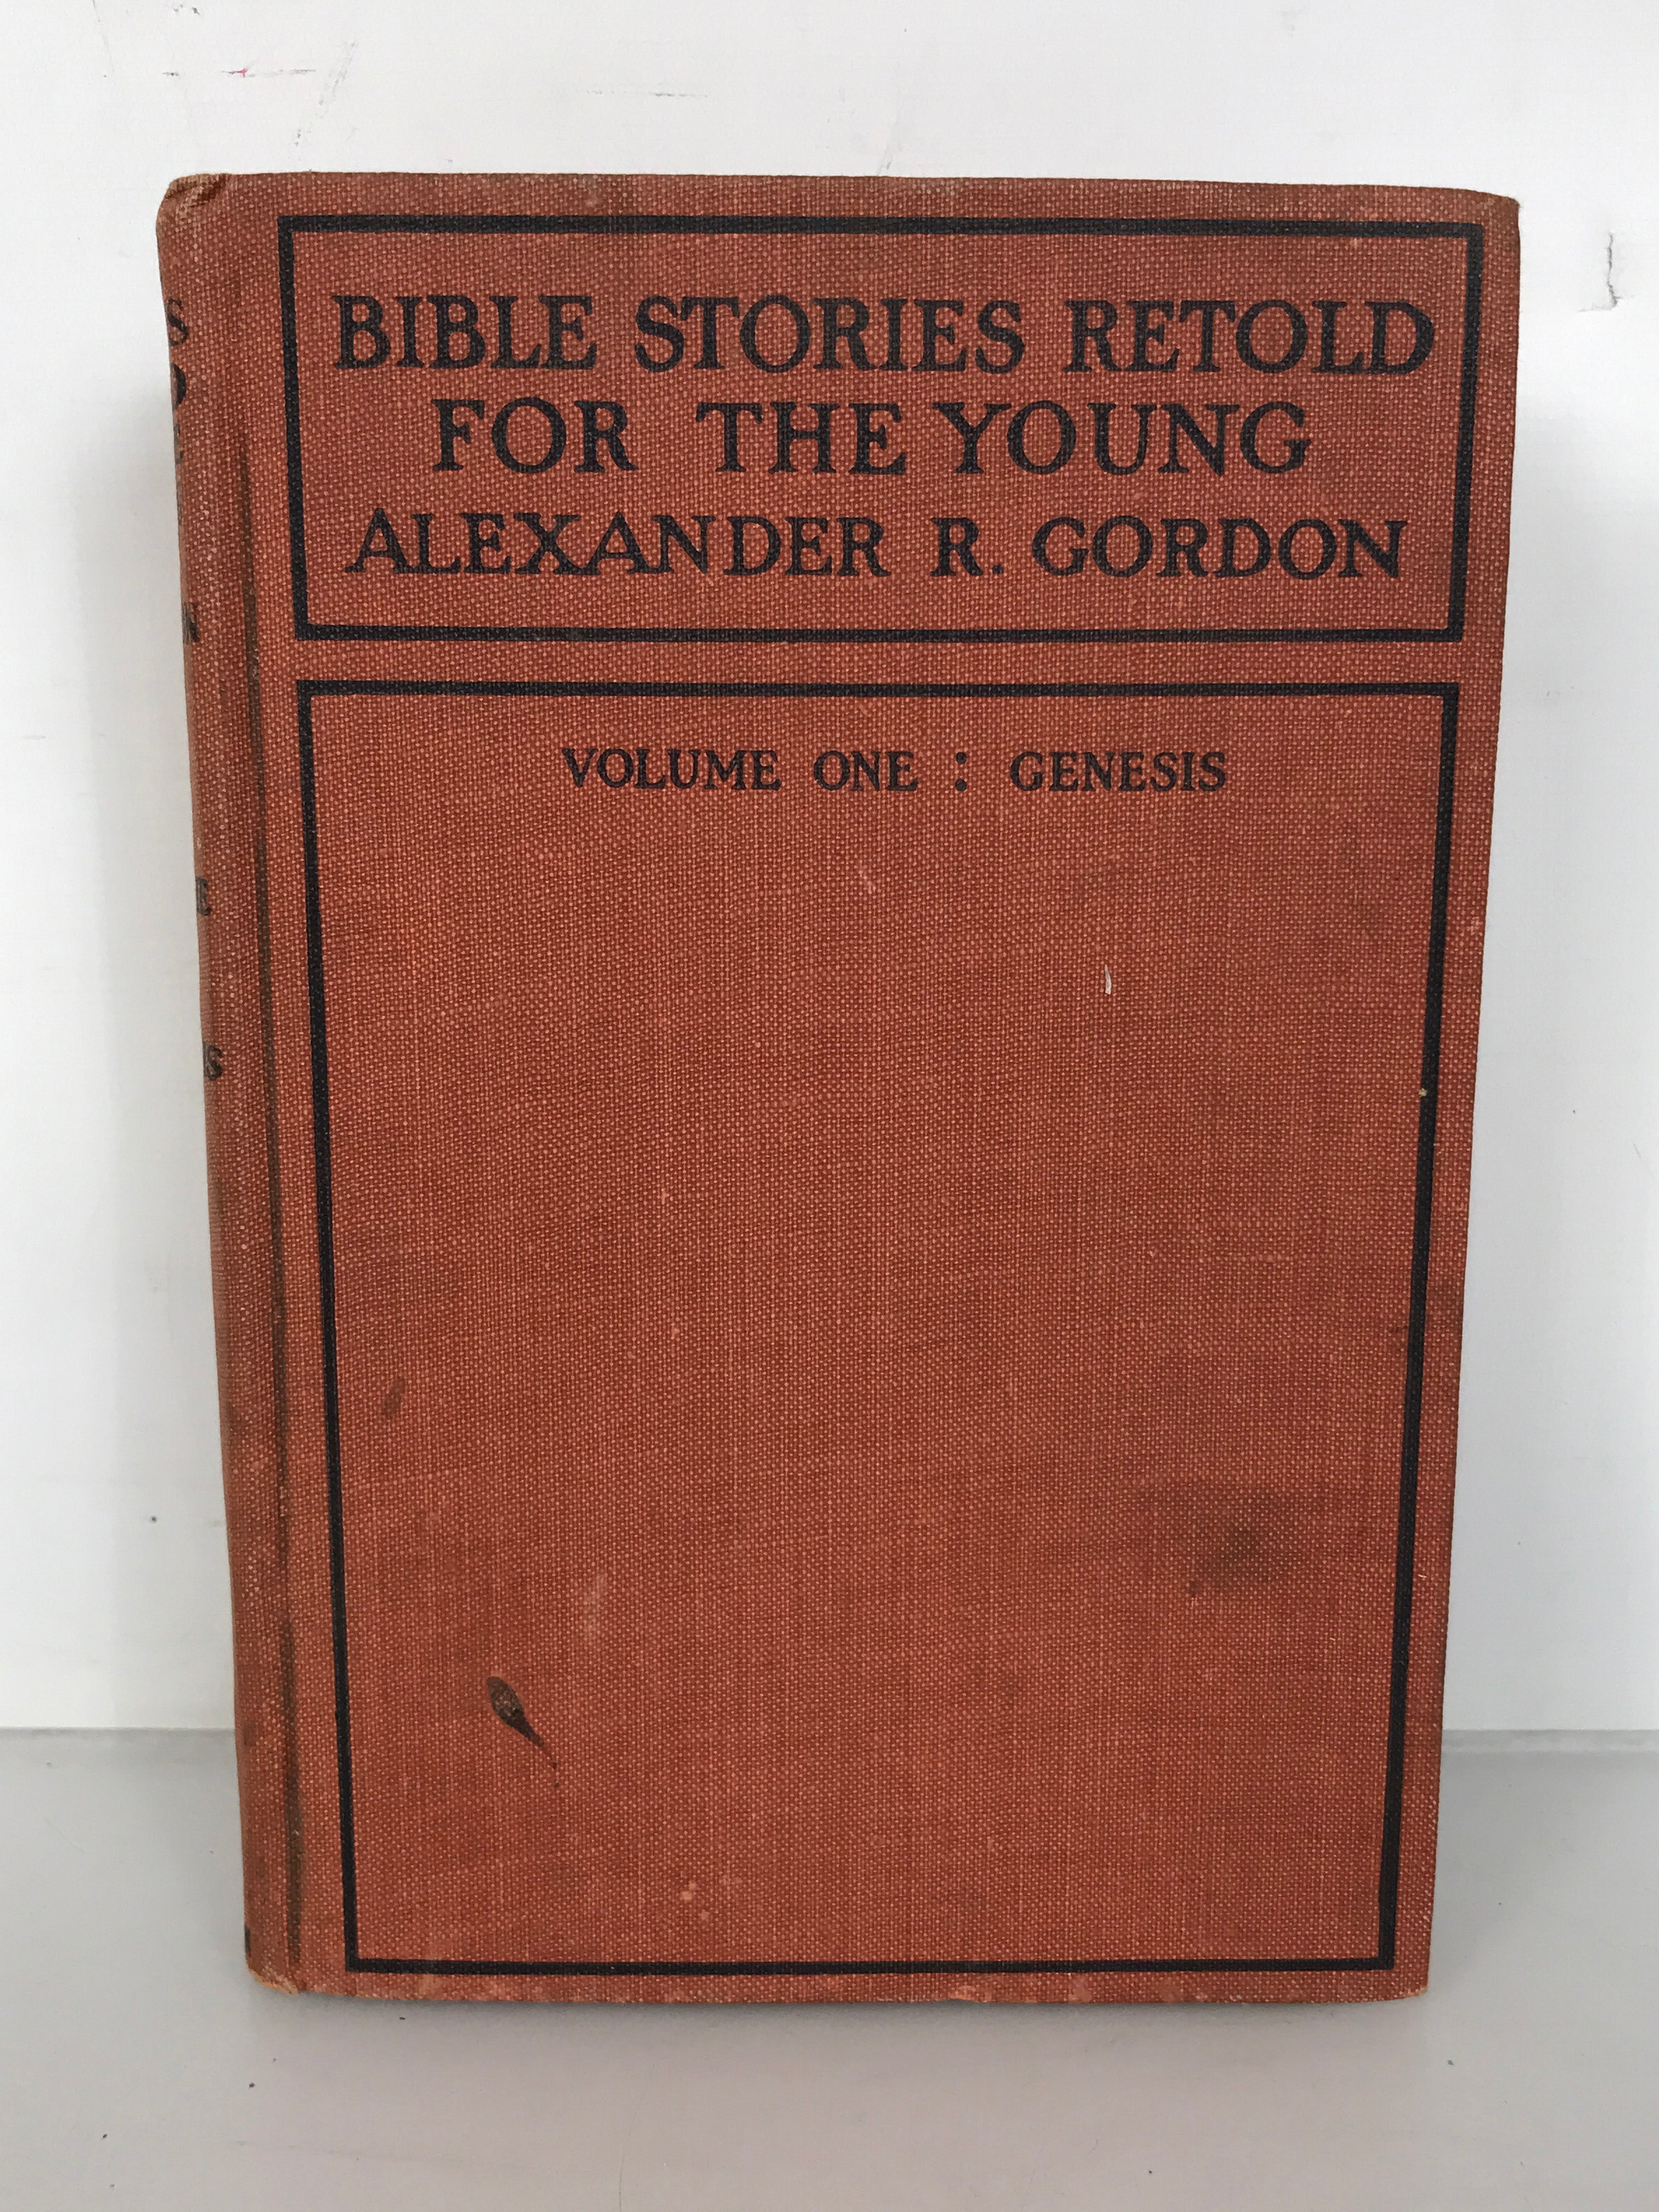 Bible Stories Retold for the Young by Alexander R. Gordon Volume 1: Genesis 1920 HC